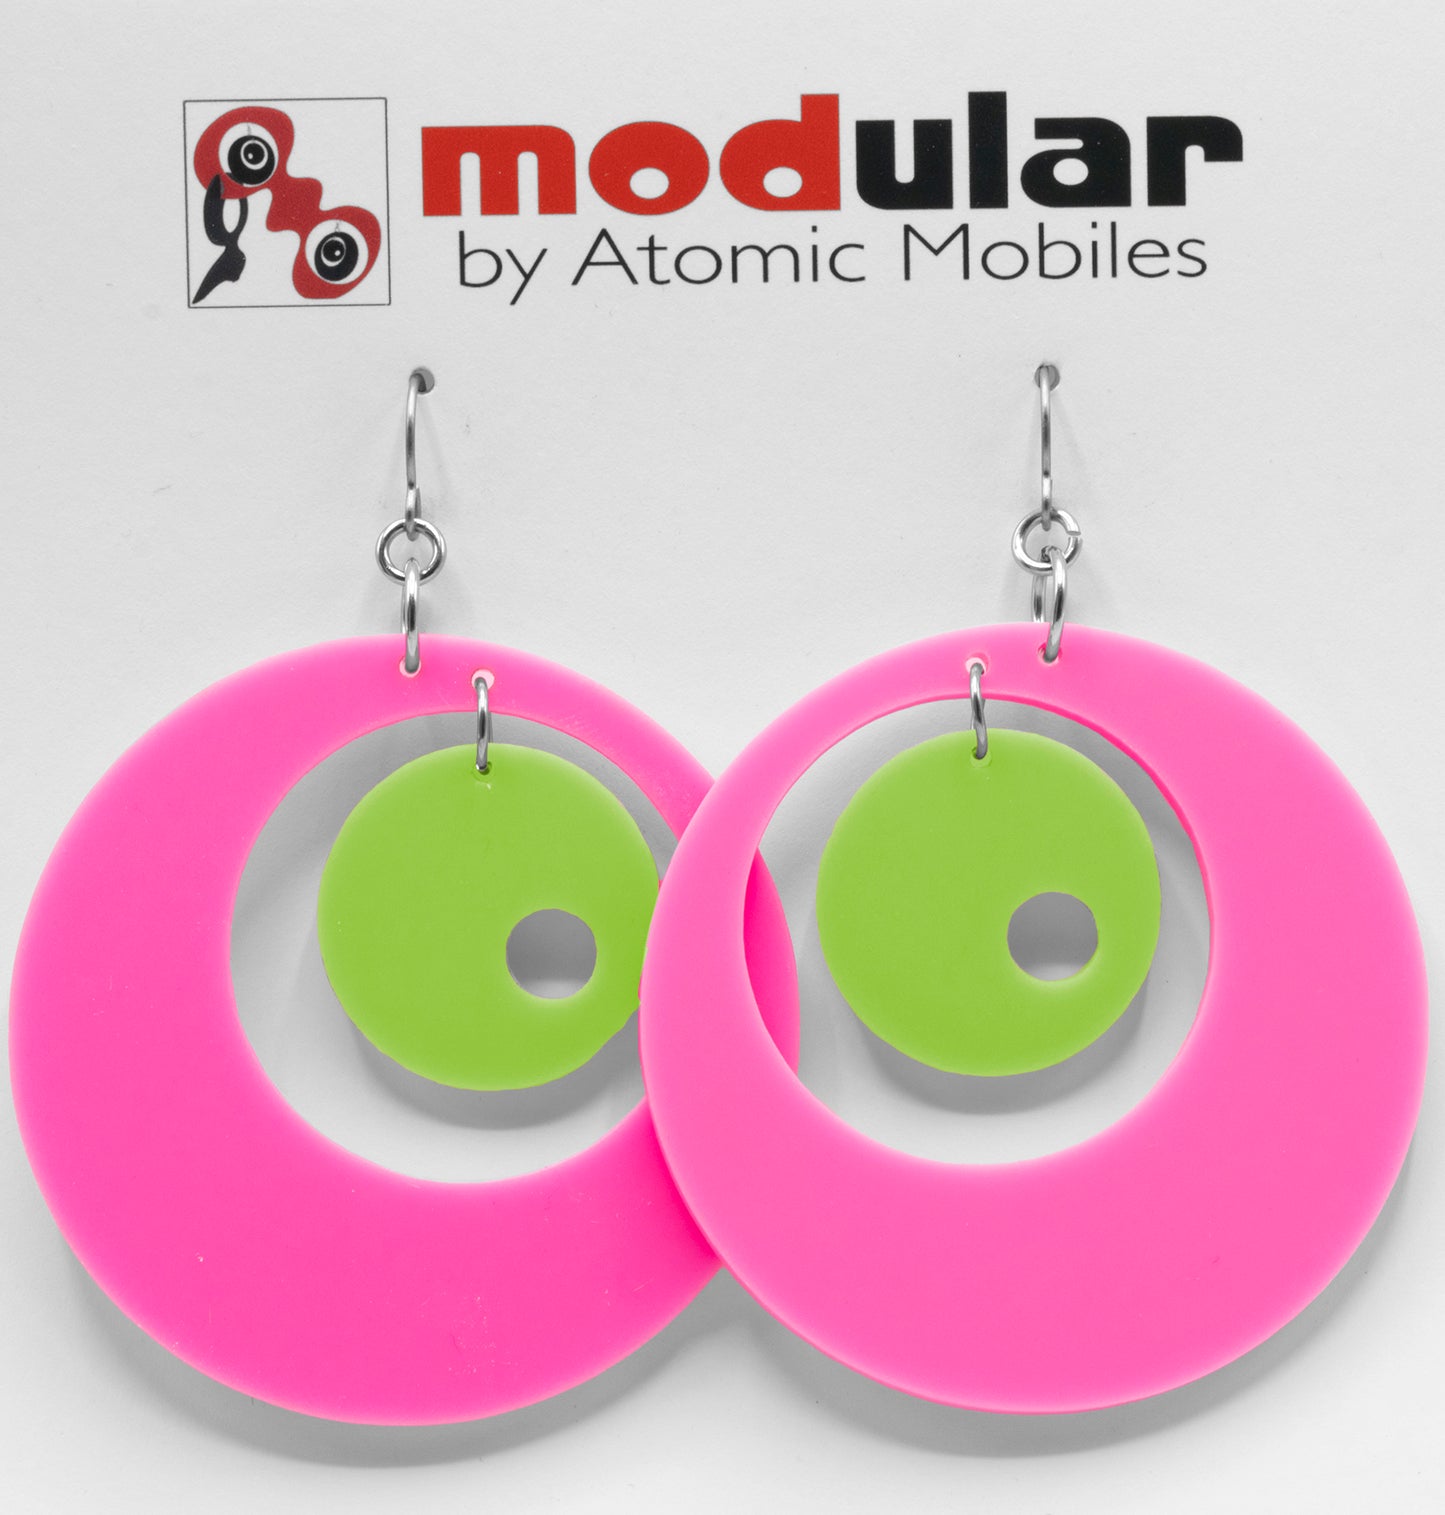 MODular Earrings - Groovy Statement Earrings in Hot Pink and Lime by AtomicMobiles.com - retro era inspired mod handmade jewelry